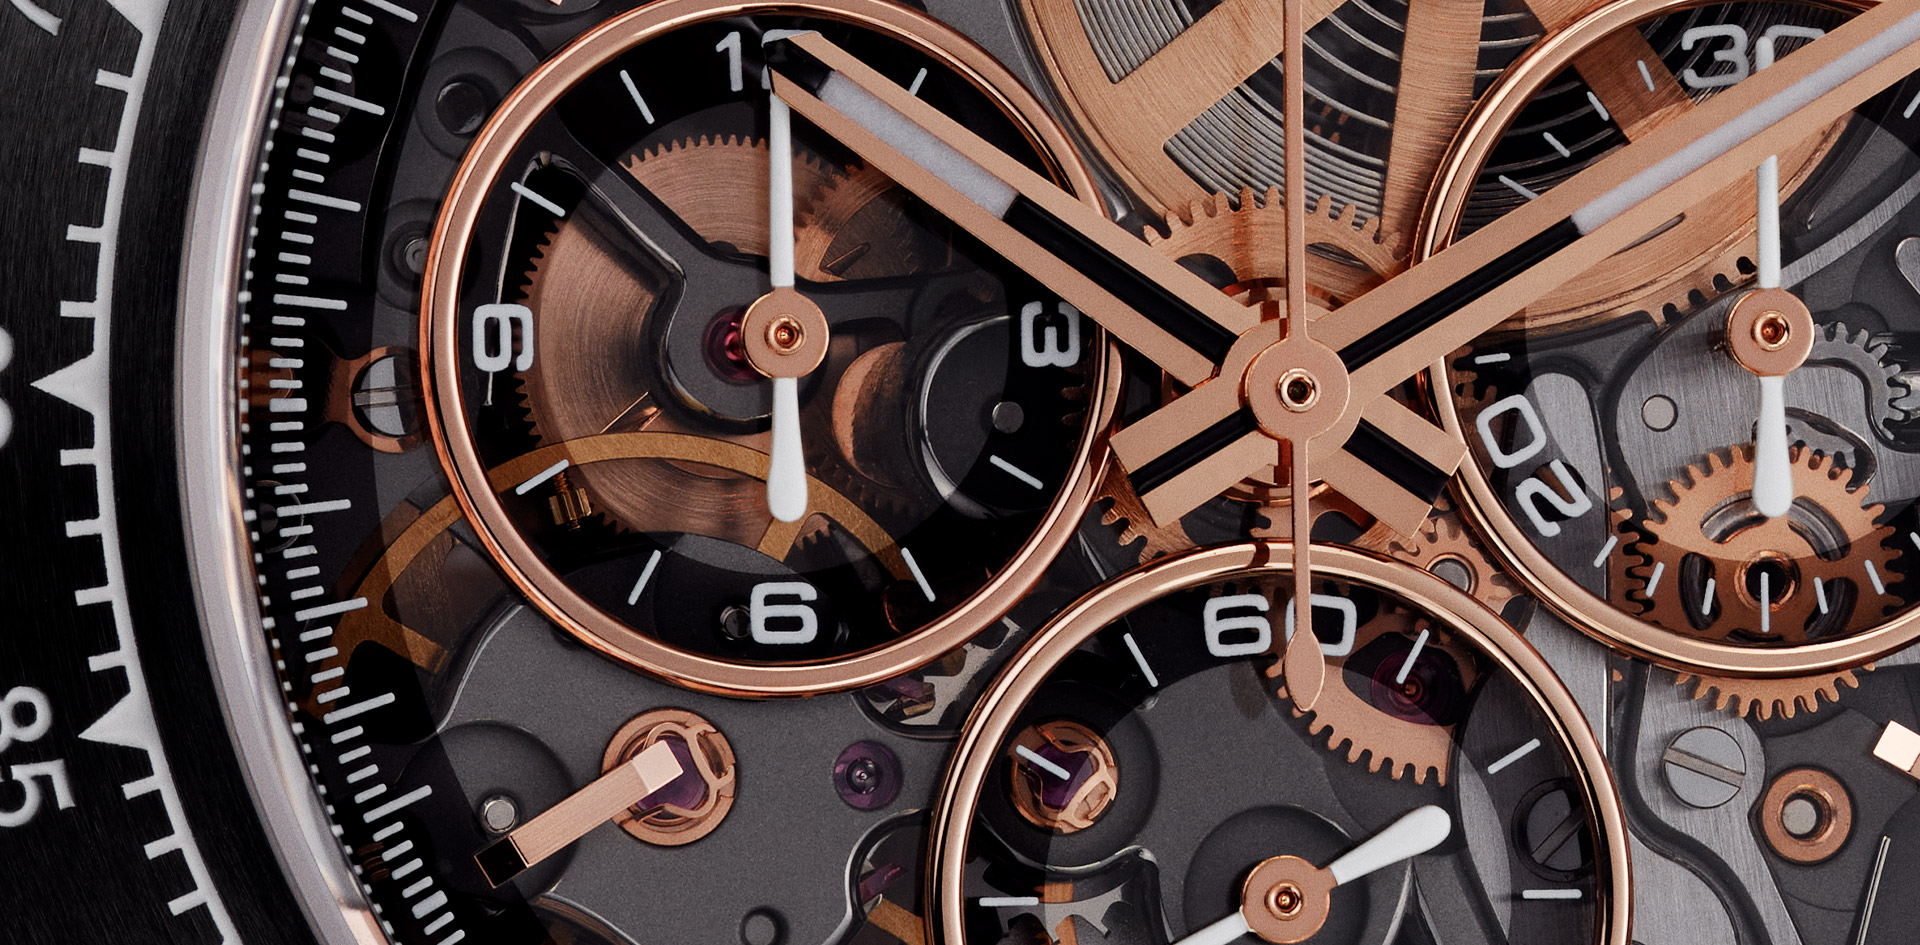 The Maggiore Challenge rose gold counters and sapphire dial